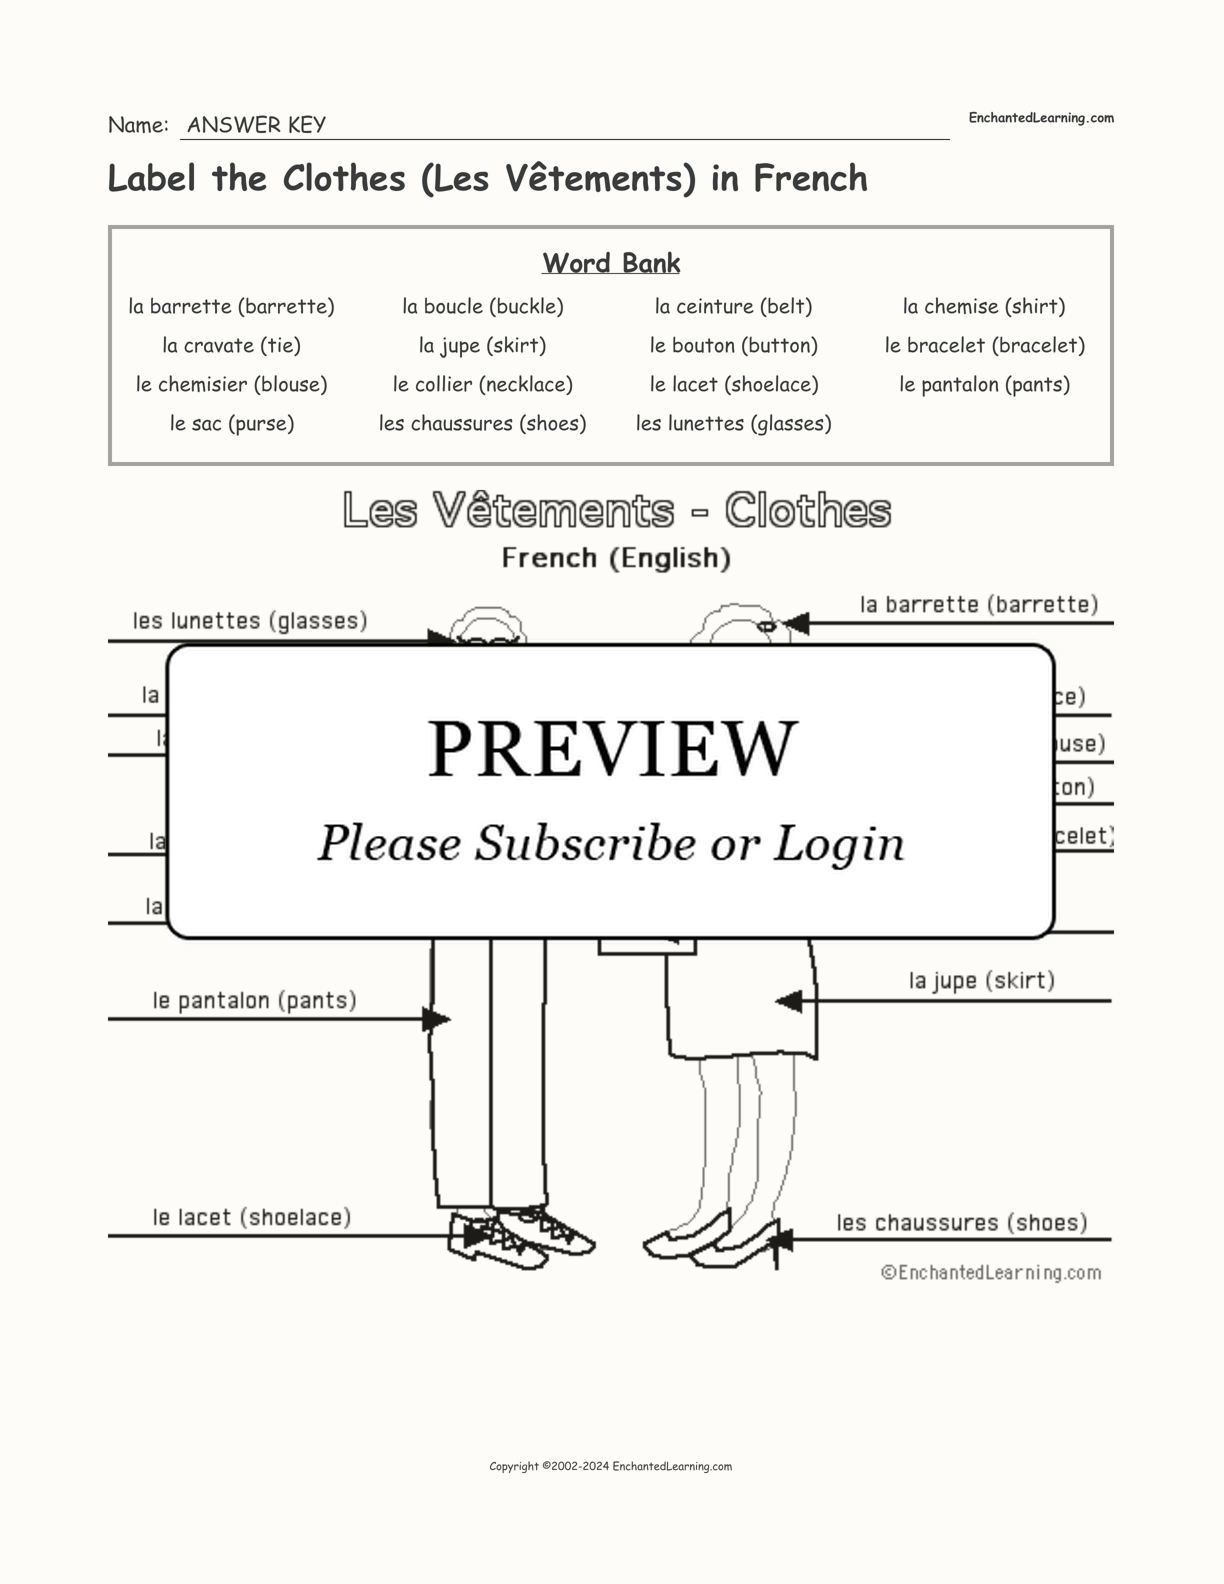 Label the Clothes (Les Vêtements) in French interactive worksheet page 2